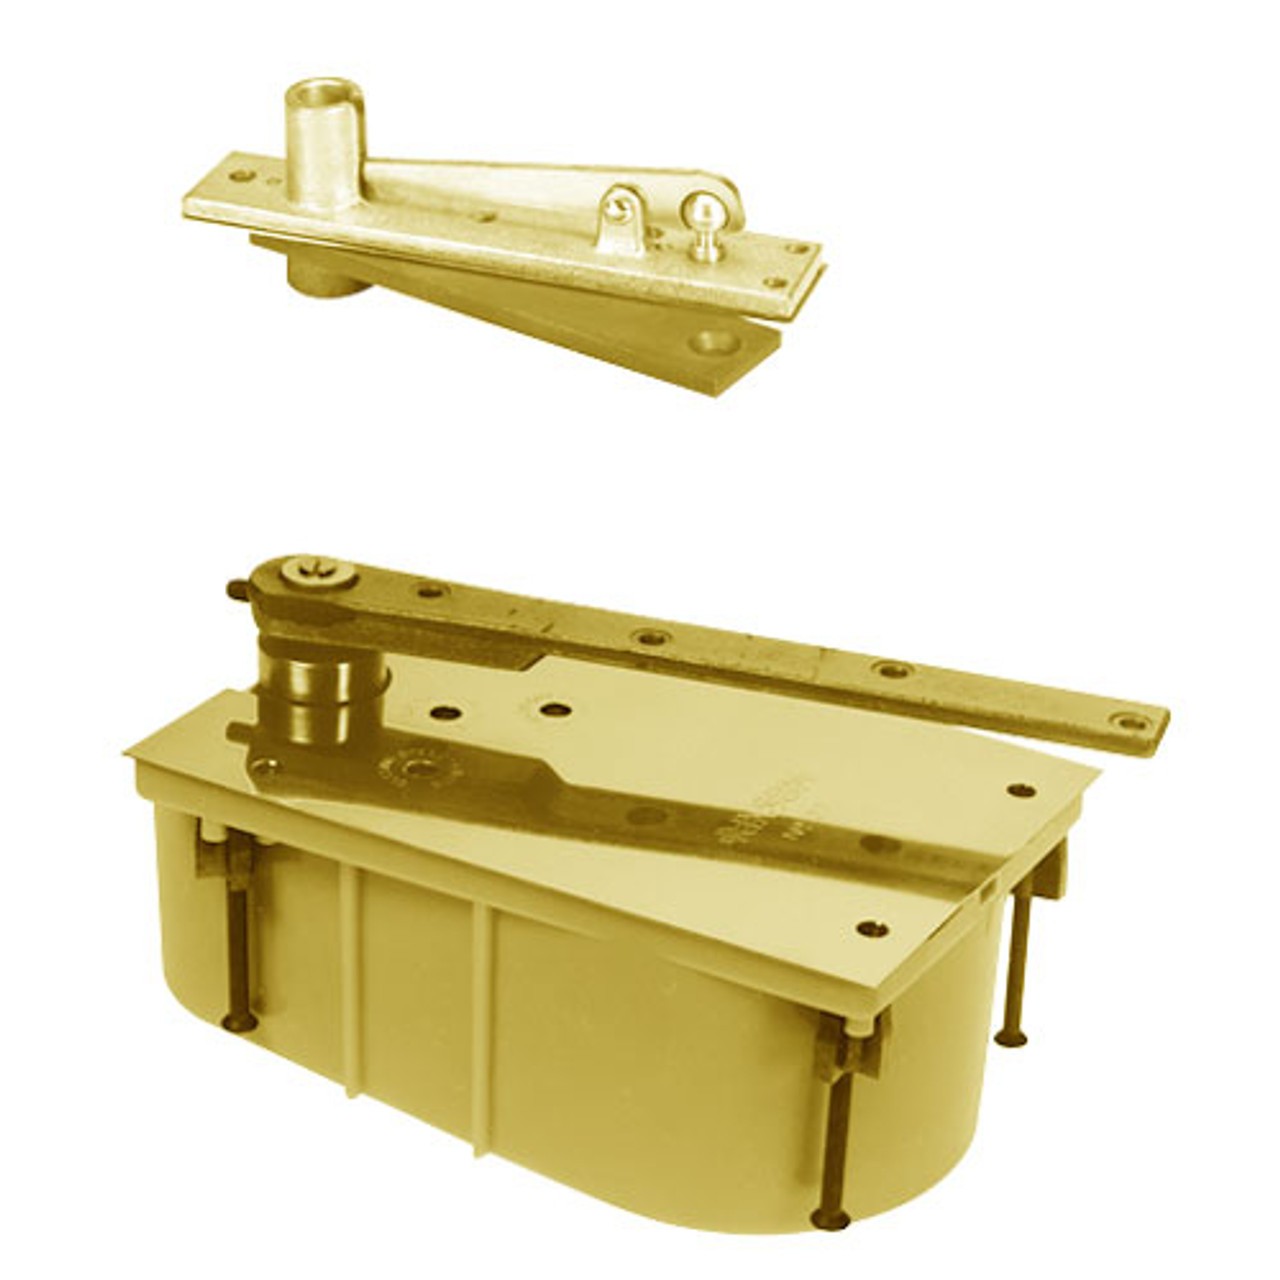 28-105N-554-RH-605 Rixson 28 Series Heavy Duty Single Acting Center Hung Floor Closer with Concealed Arm in Bright Brass Finish